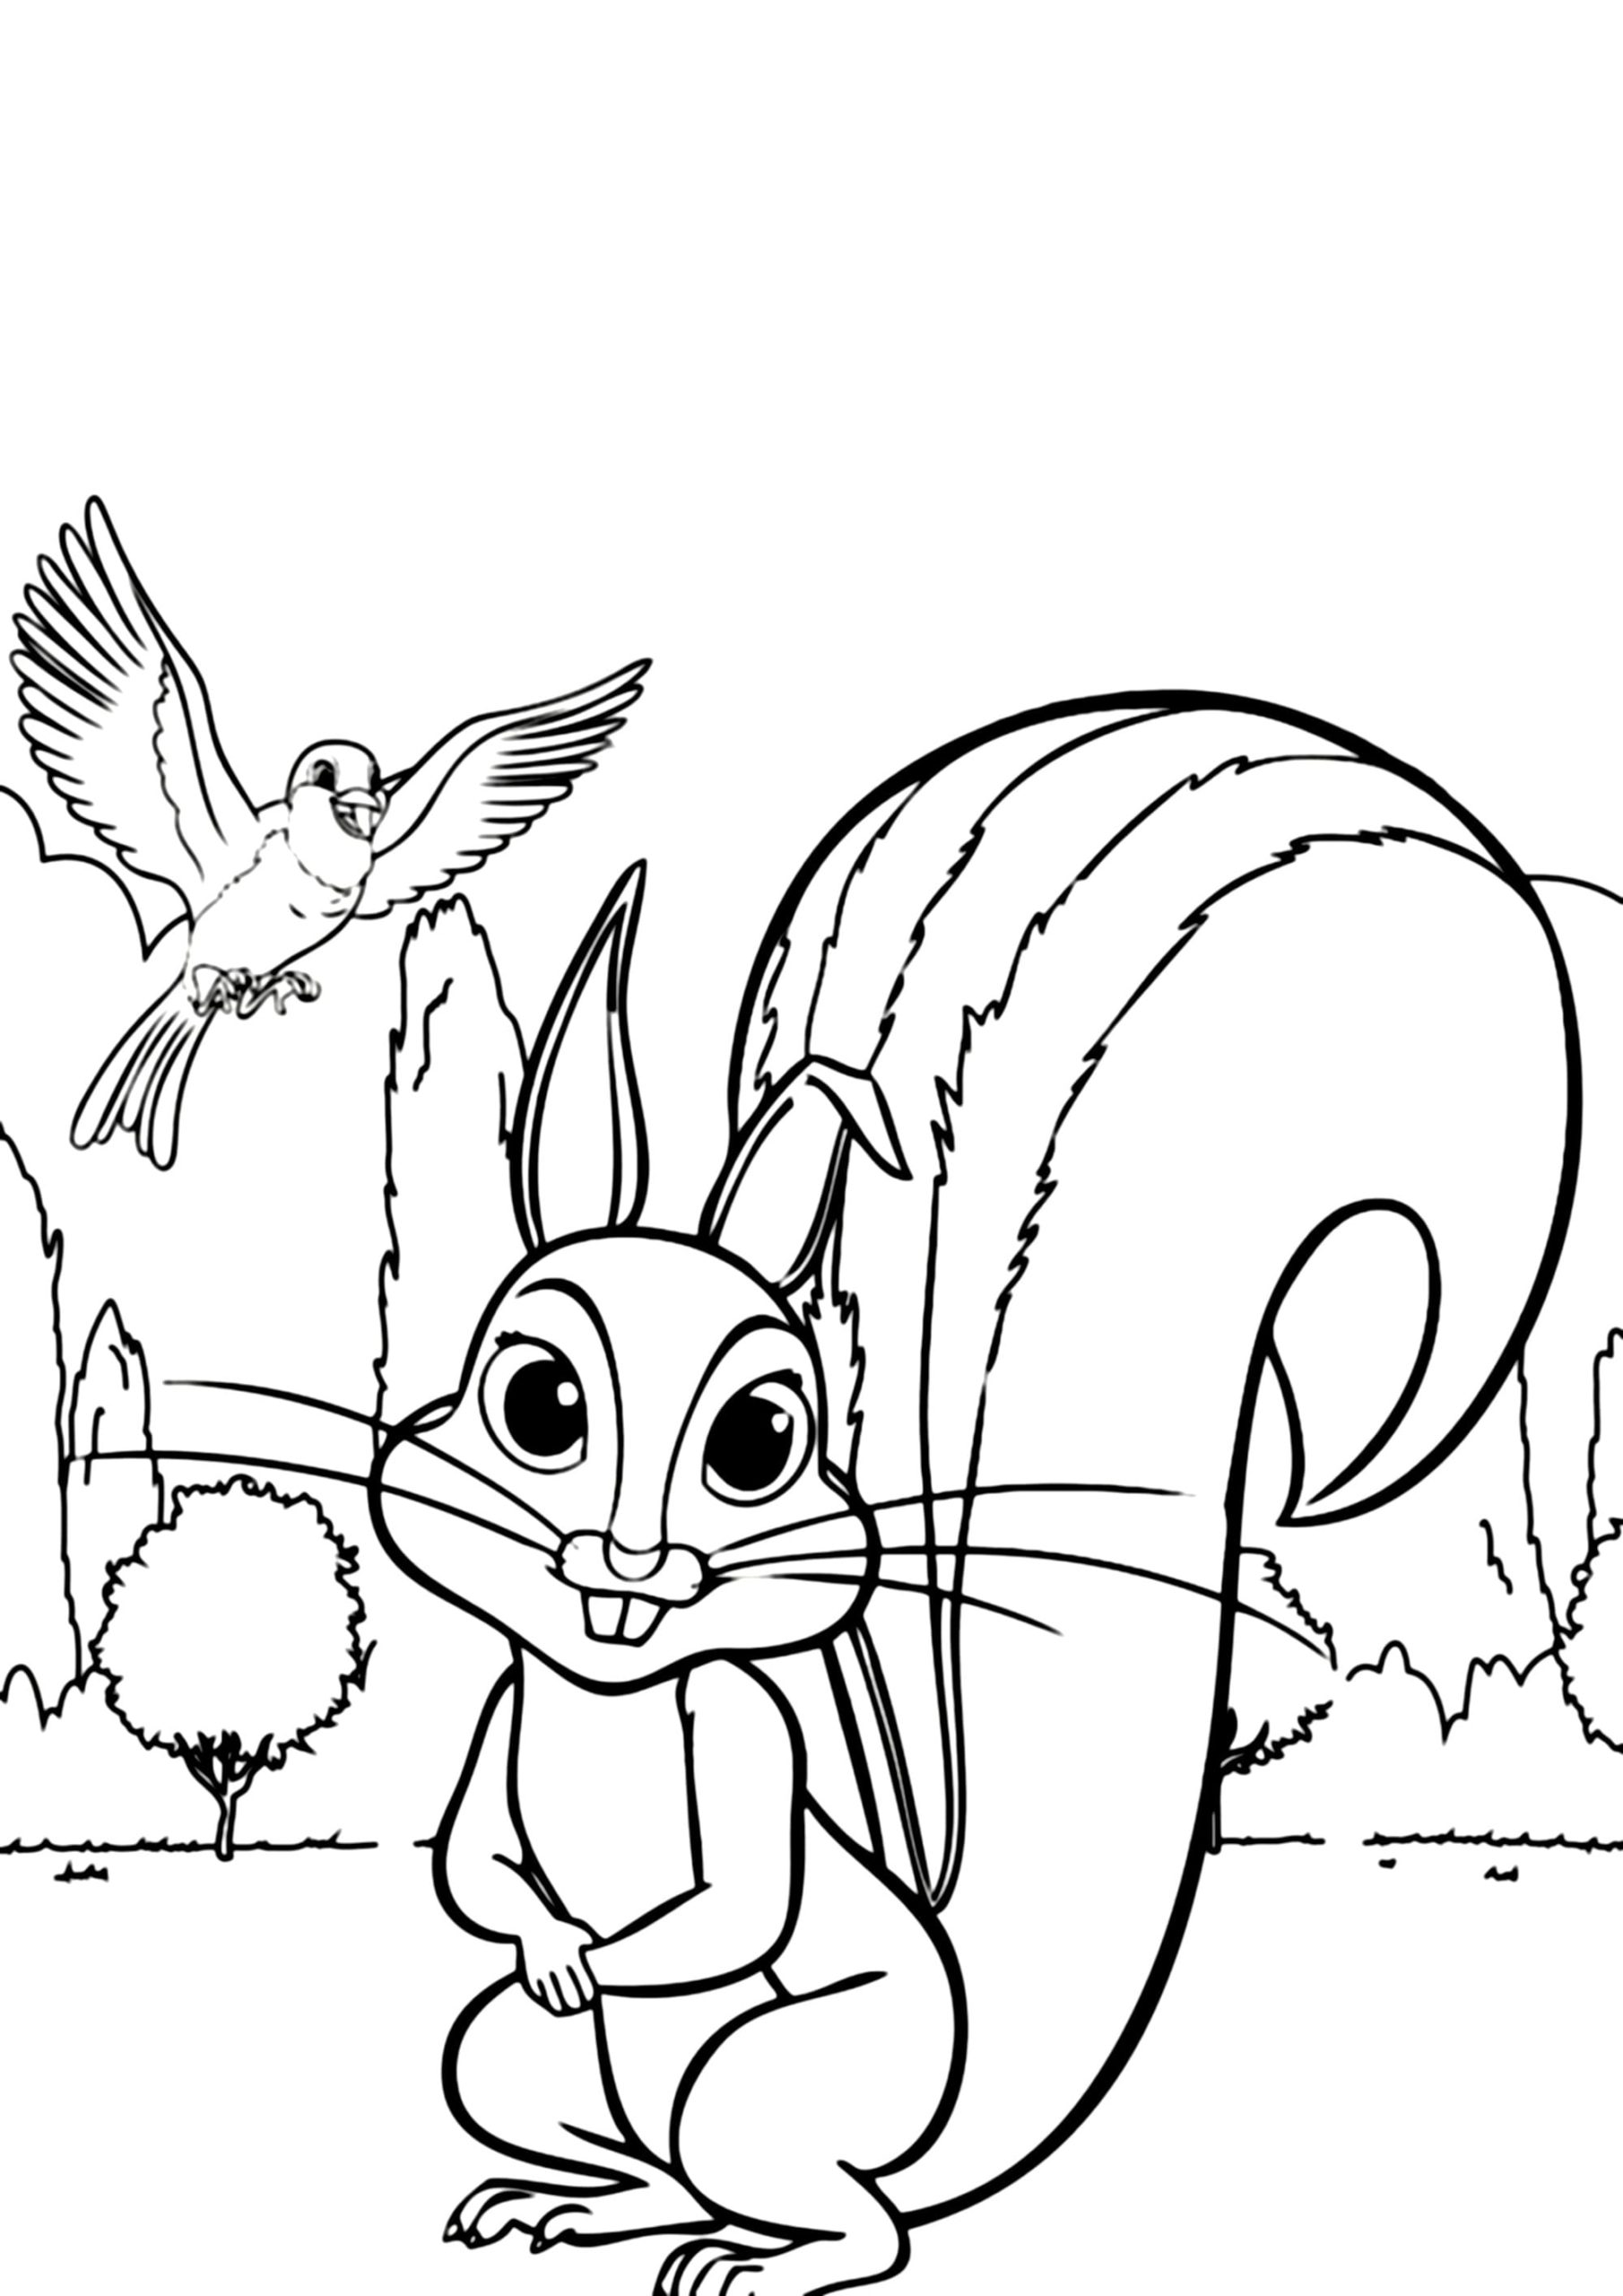 Coloring page Sofia the First Squirrel and bird